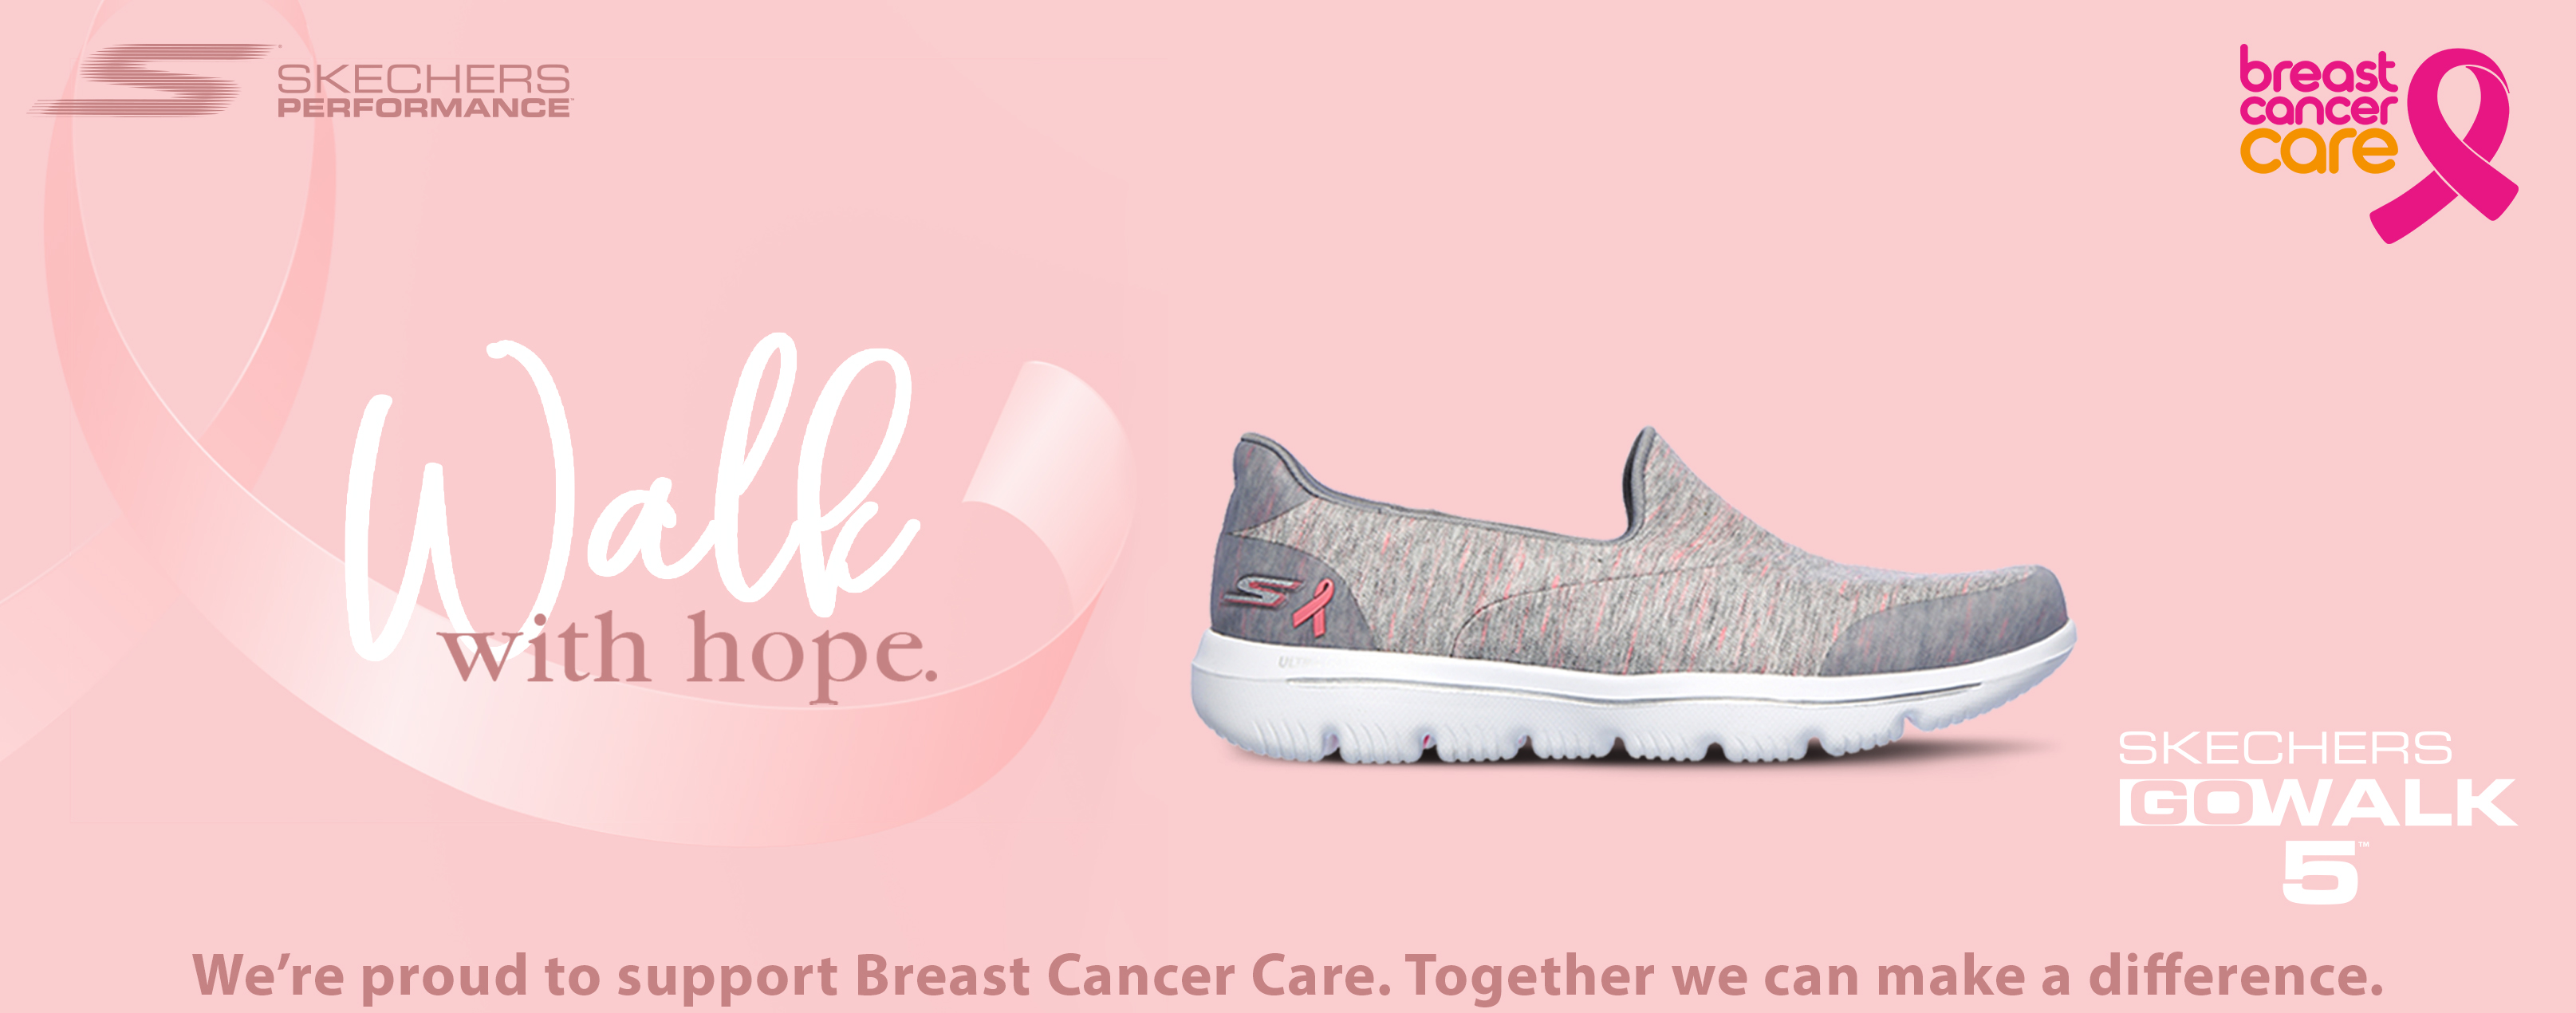 skechers breast cancer awareness shoes